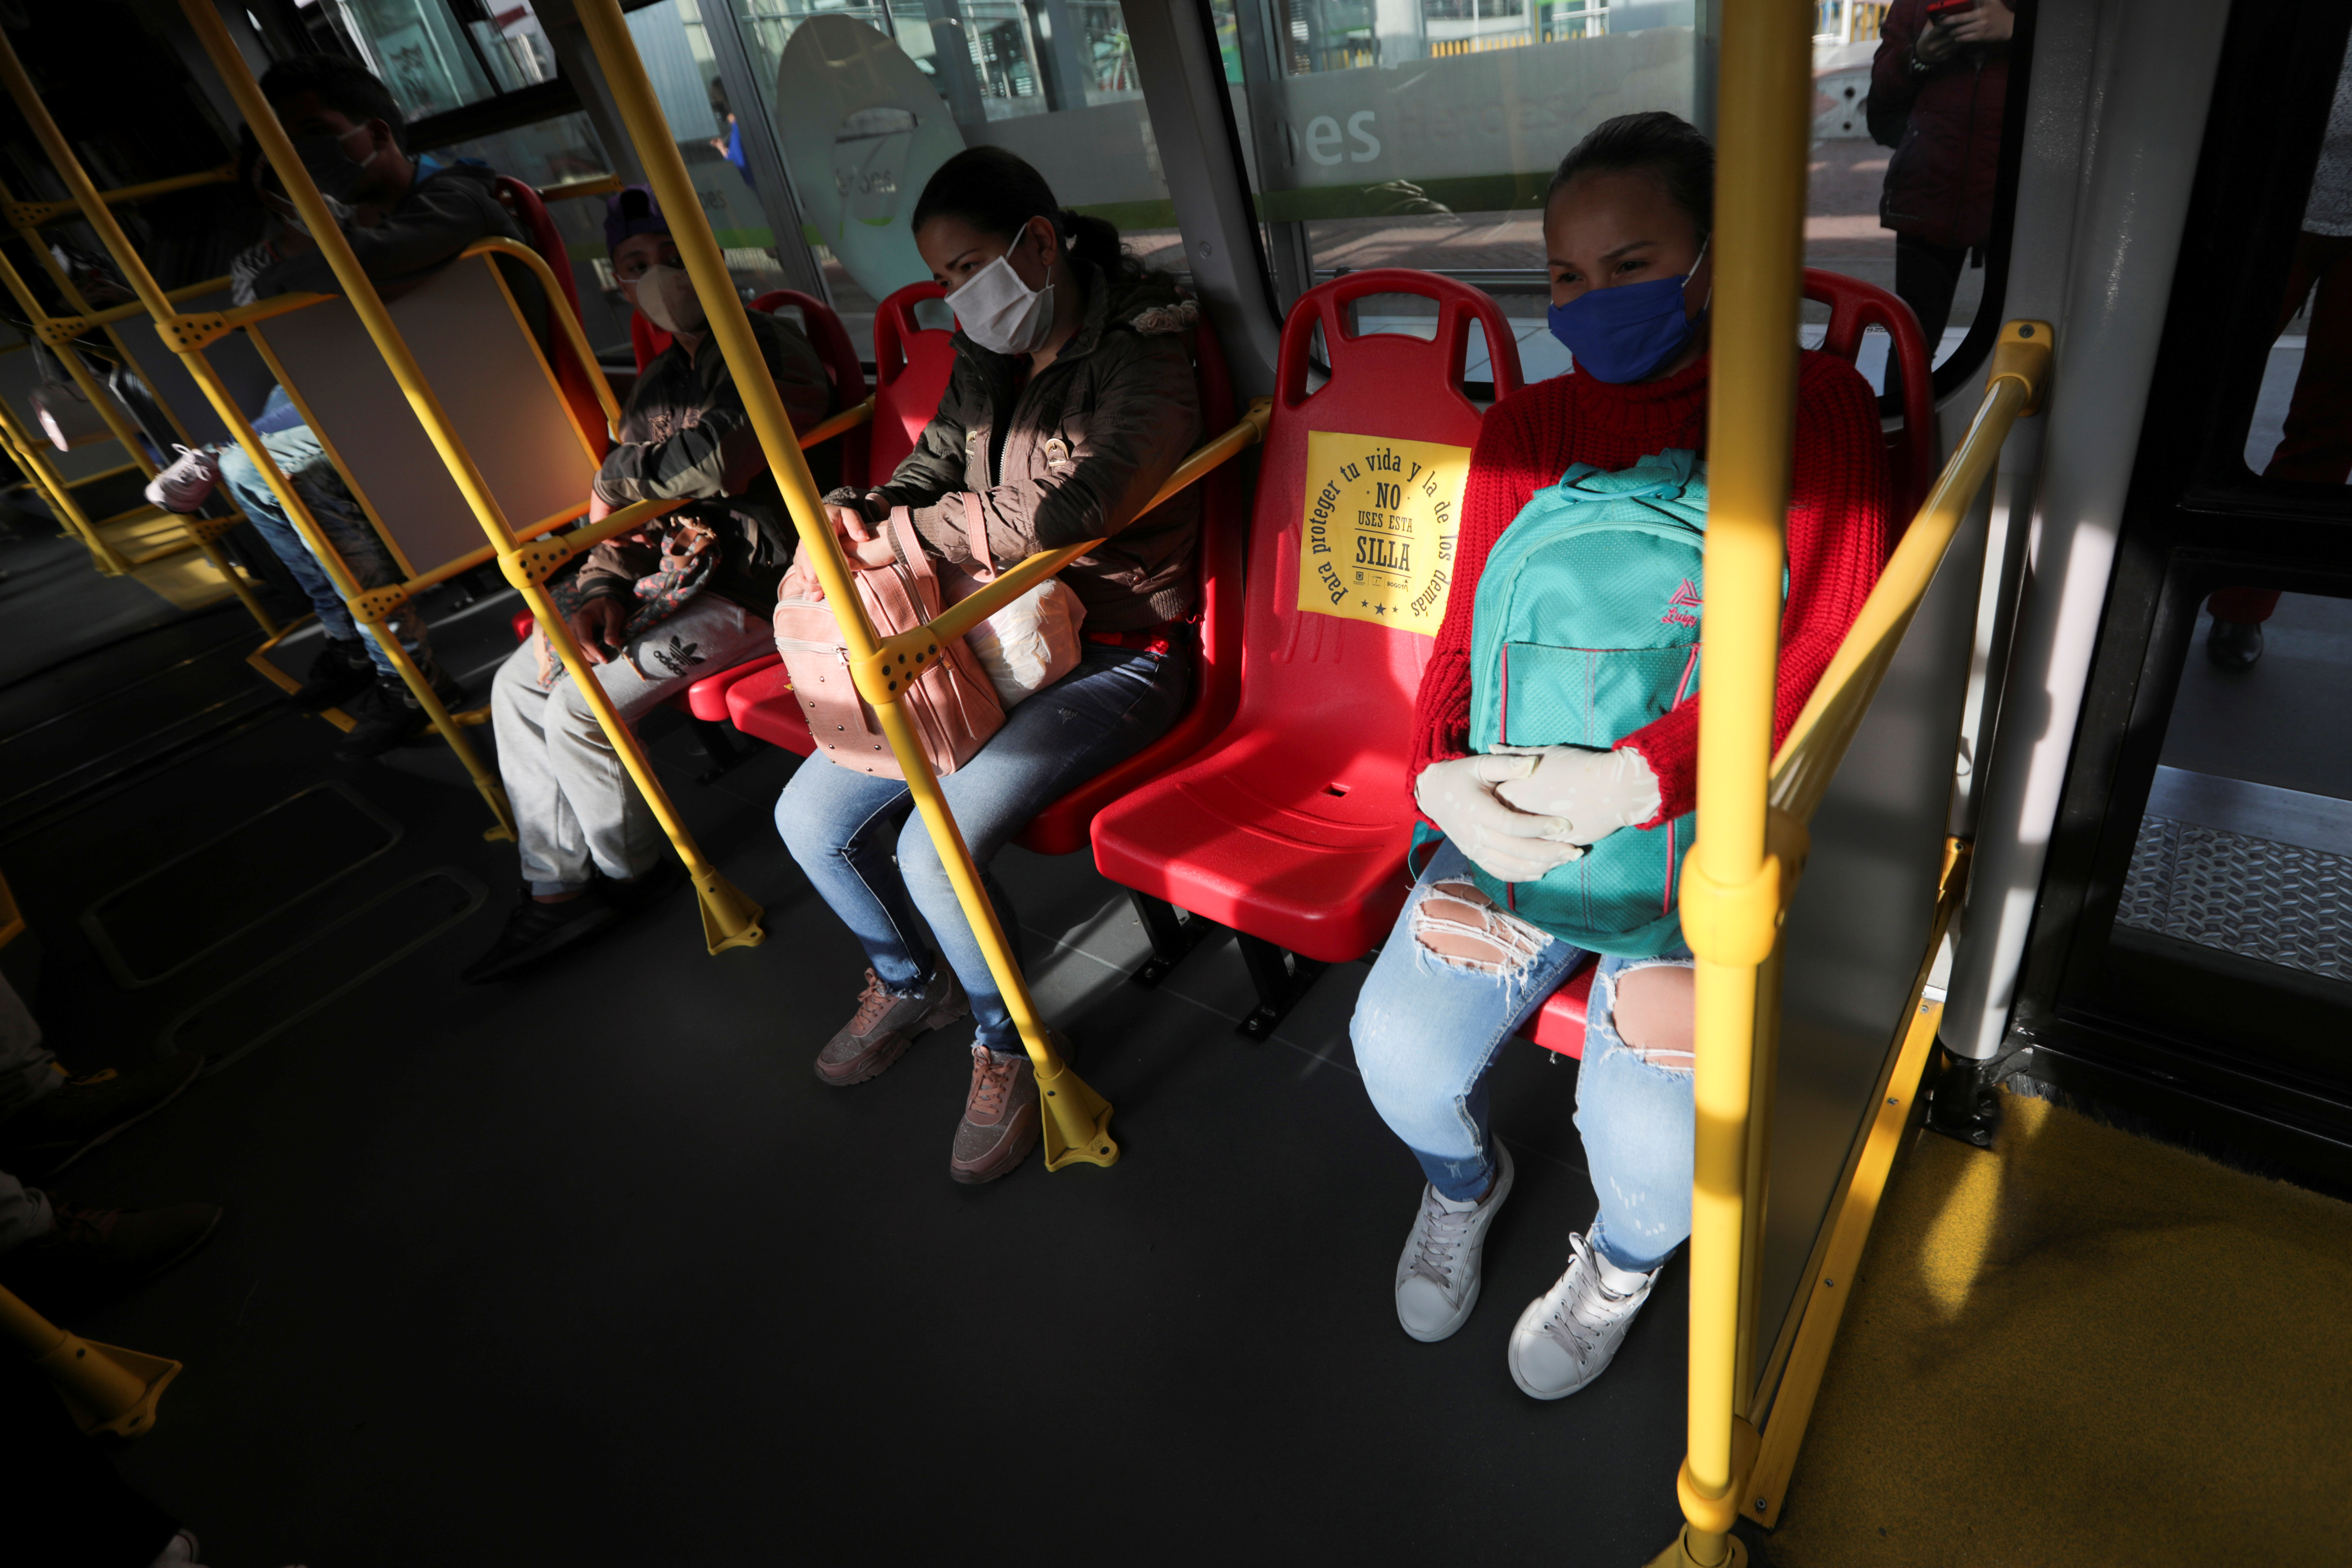 A seat with a sign that reads "To protect your life and the lives of others, do not use this seat" is seen inside a Transmilenio transport system bus, after the government allowed certain sectors to return to work, amid the outbreak of the coronavirus disease (COVID-19) in Bogota, Colombia May 11, 2020. REUTERS/Luisa Gonzalez